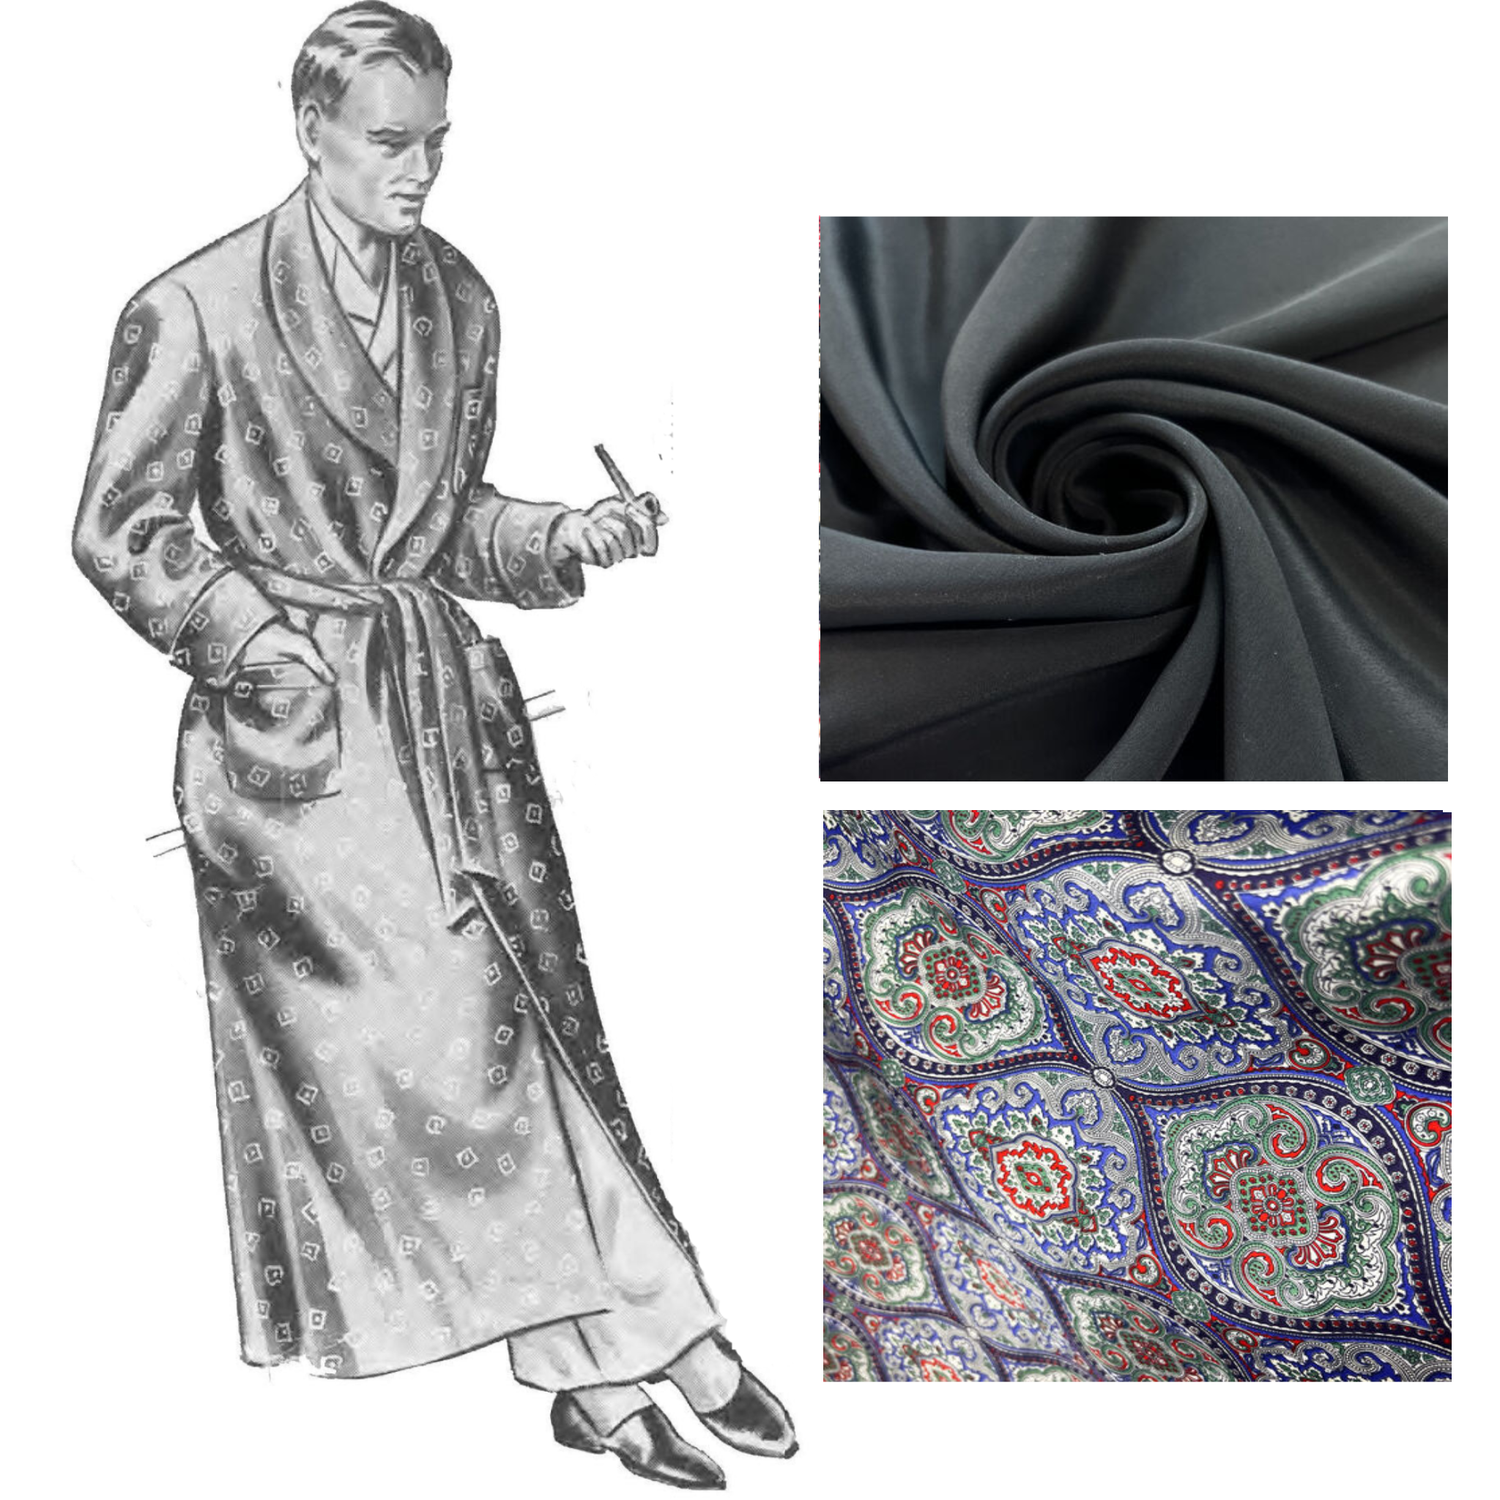 Man wearing dressing gowns and showing example fabrics